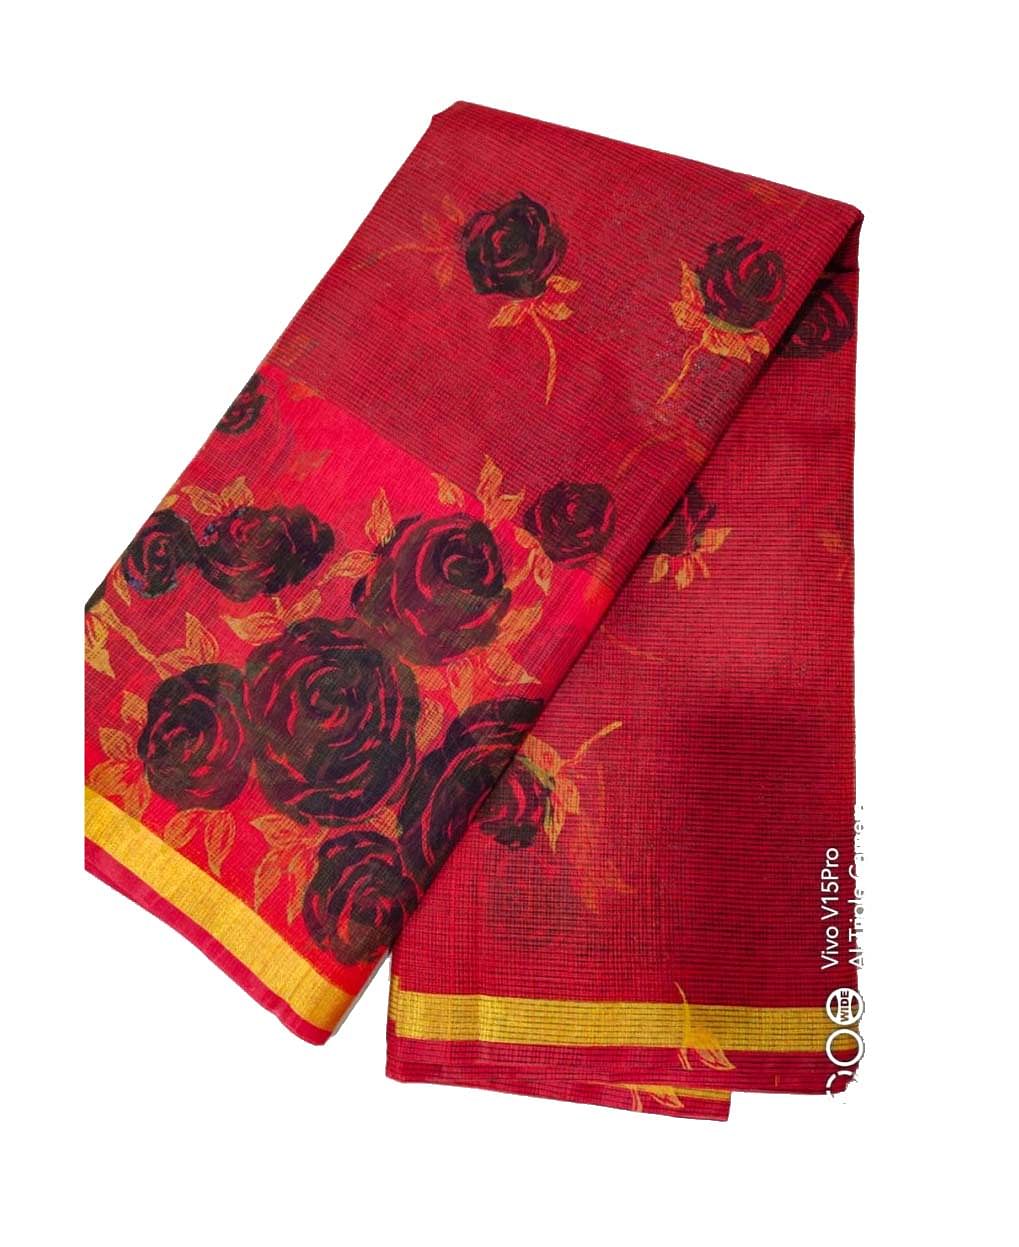 WOMEN SYNTHETIC DORIYA SAREE WITH BLOUSE-RED-DF JULY SUMMER COOL 04